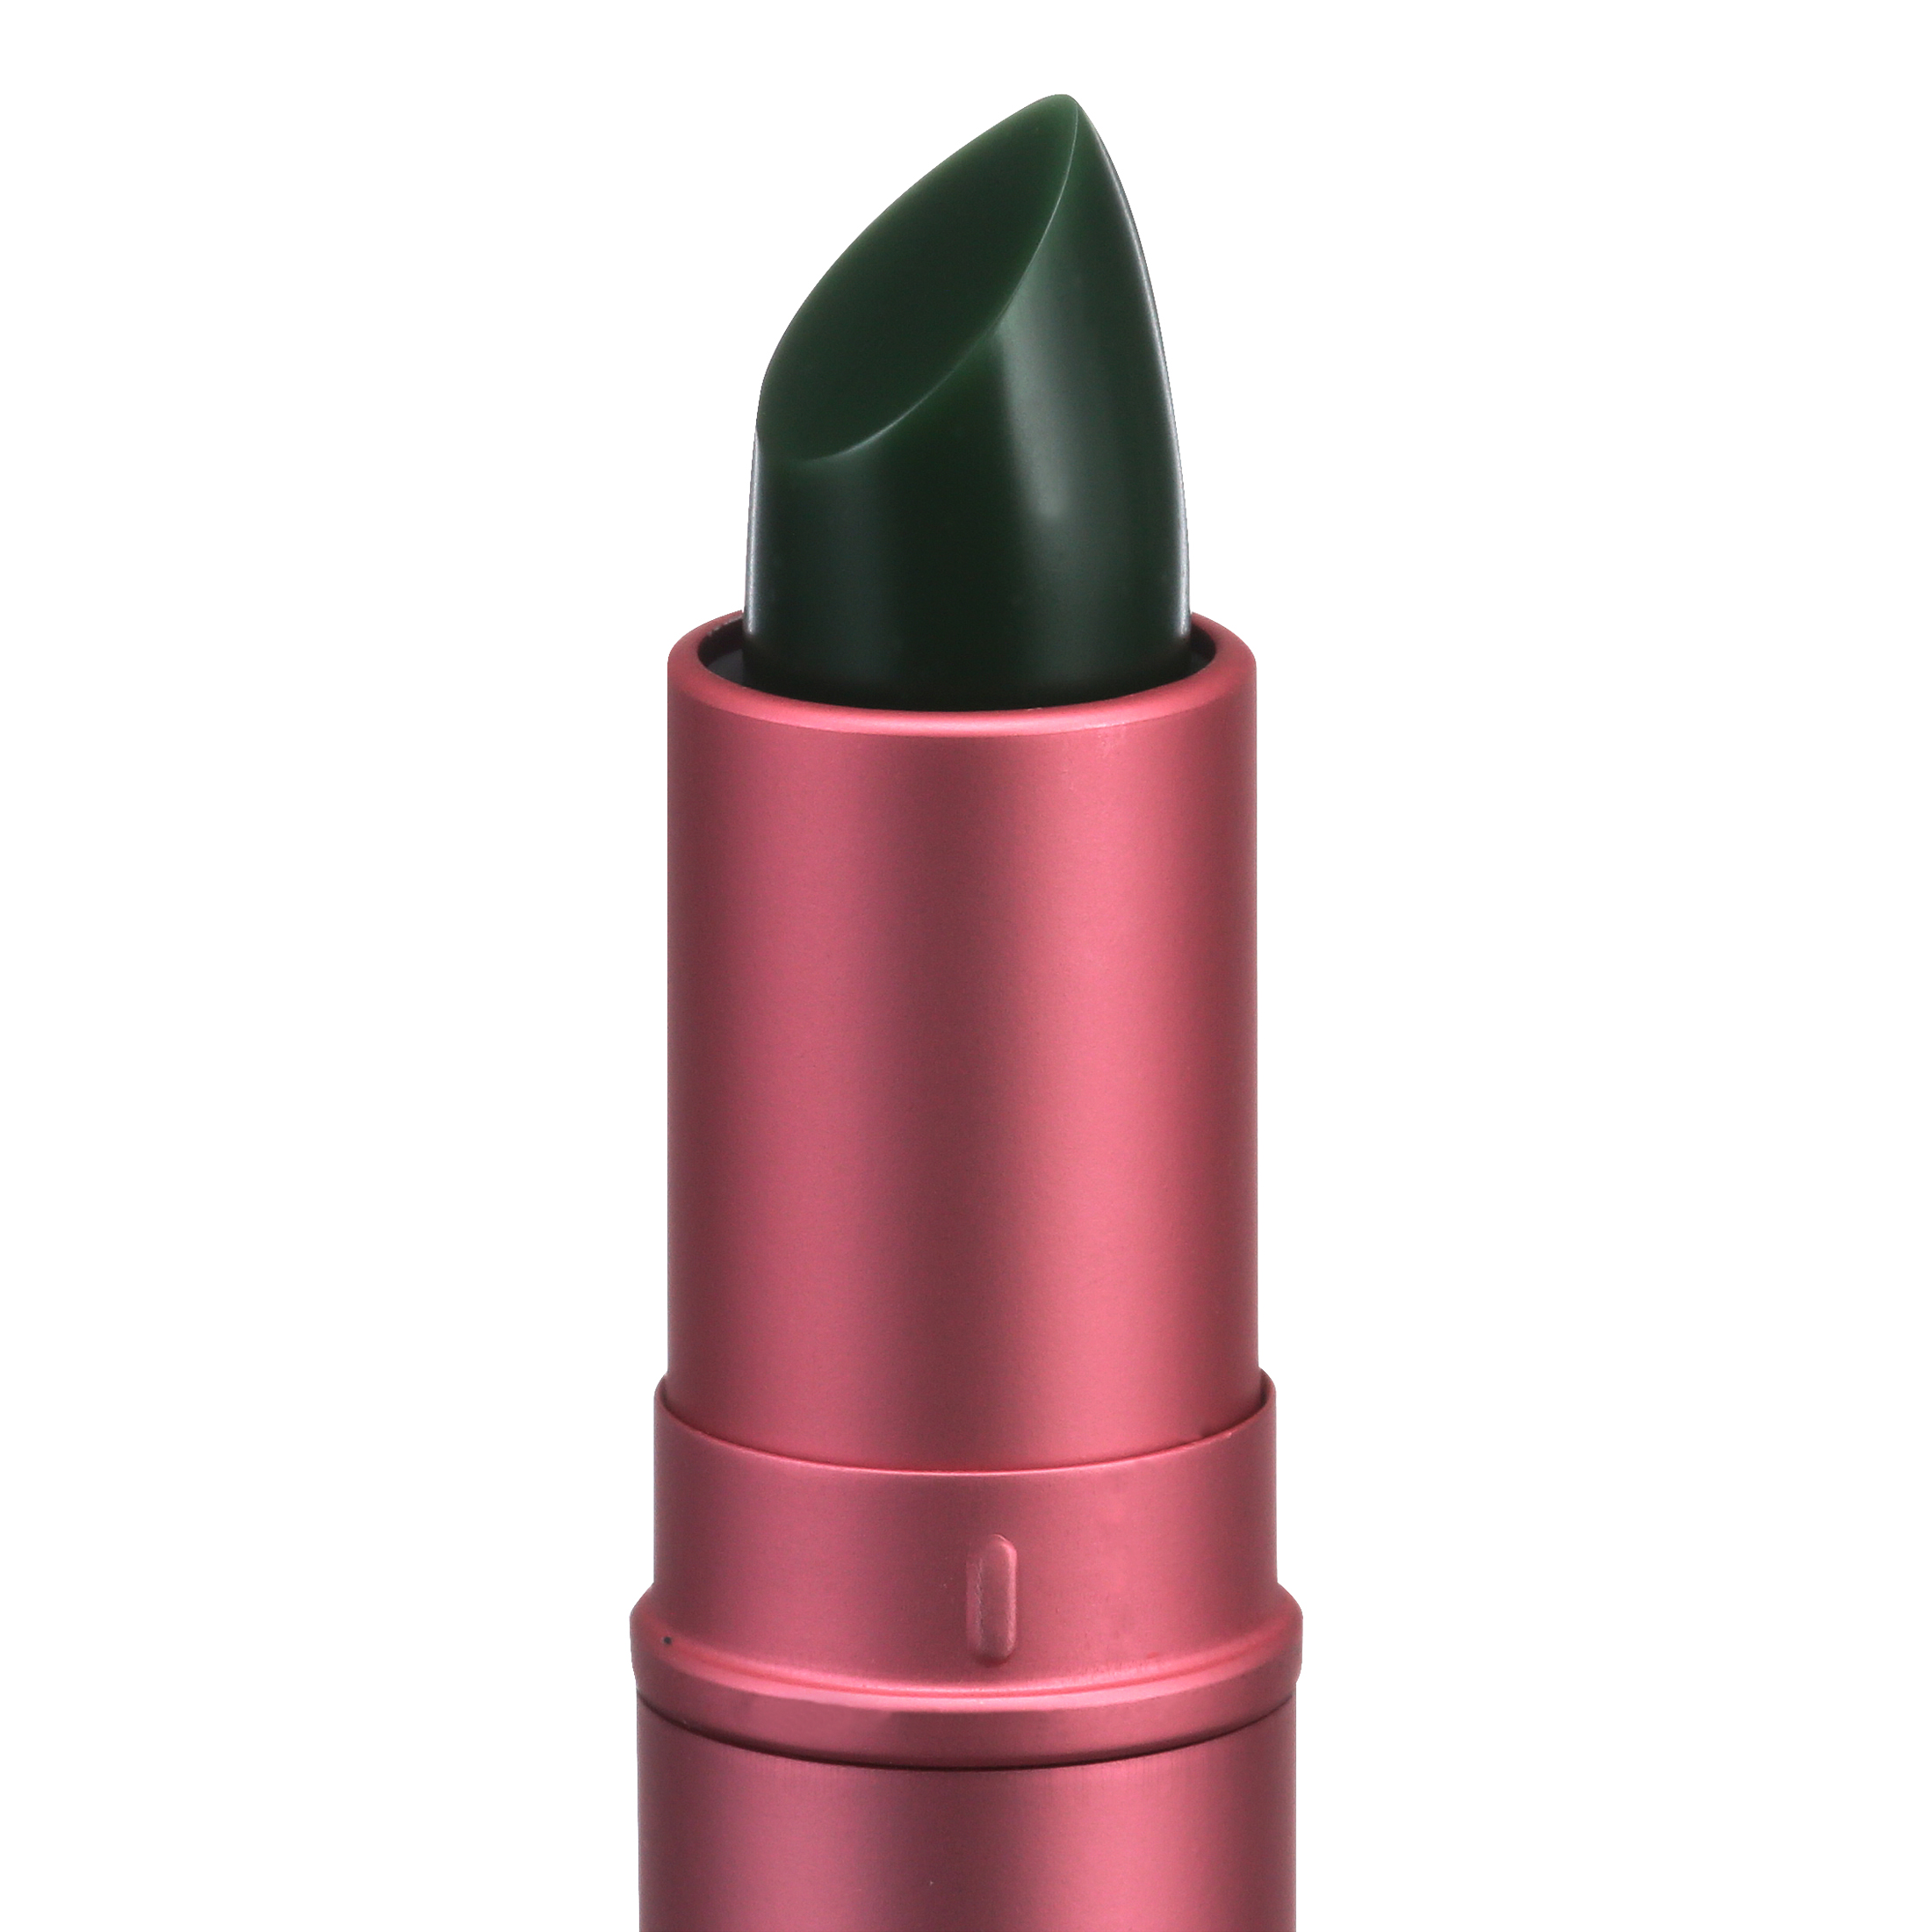 Lipstick Queen Shade Shifter, Frog Prince Lipstick - image 8 of 8